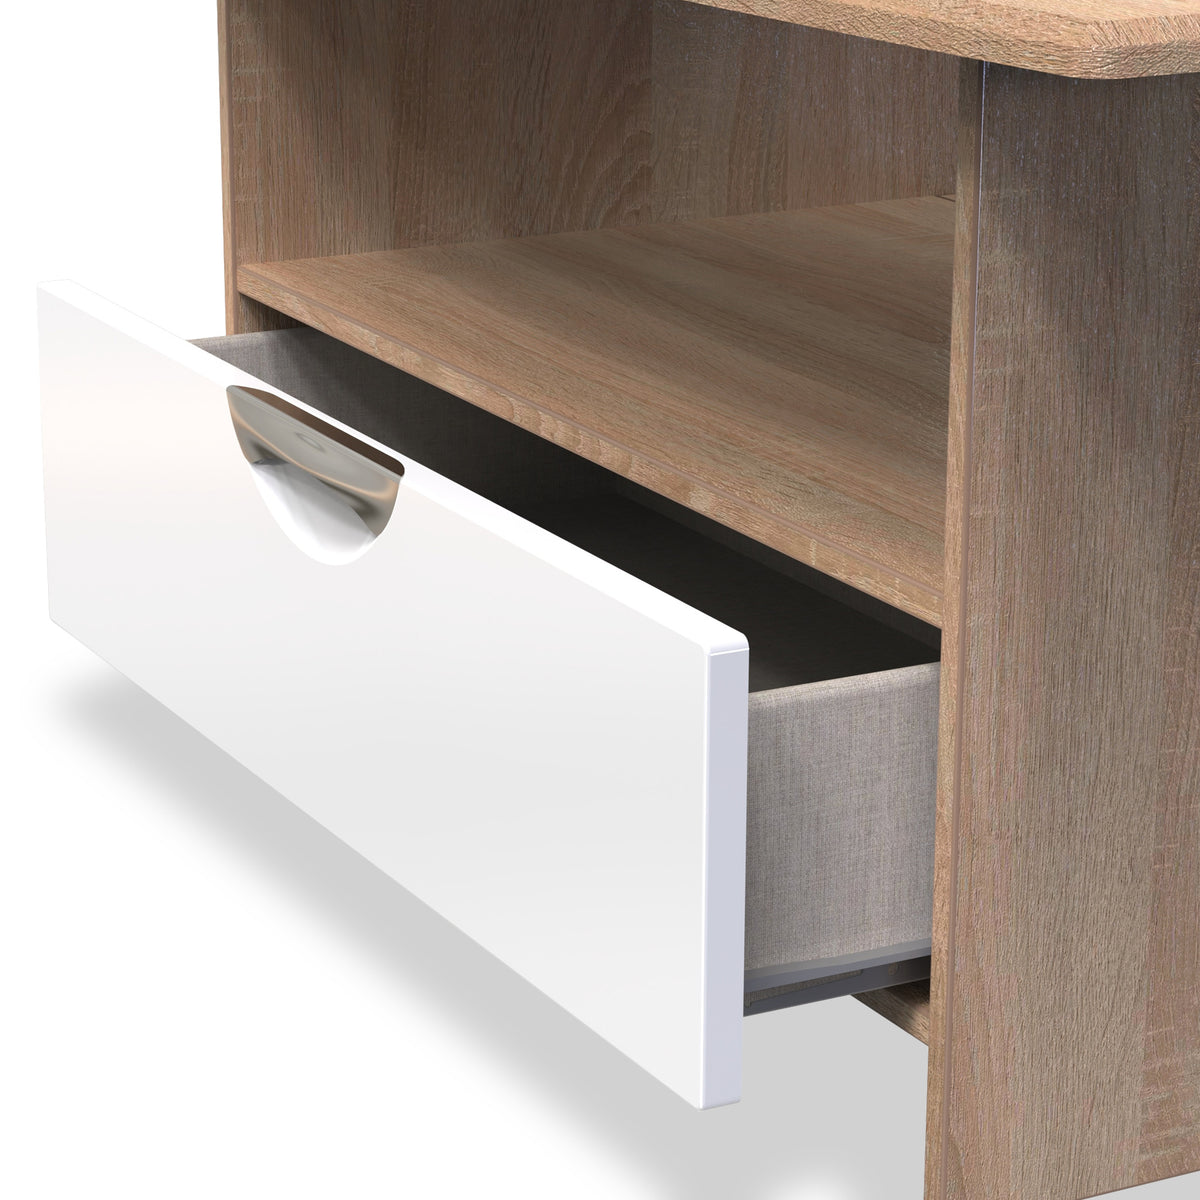 Beckett White Gloss & Light Wood 1 Drawer with Open Shelf Coffee Table by Roseland Furniture